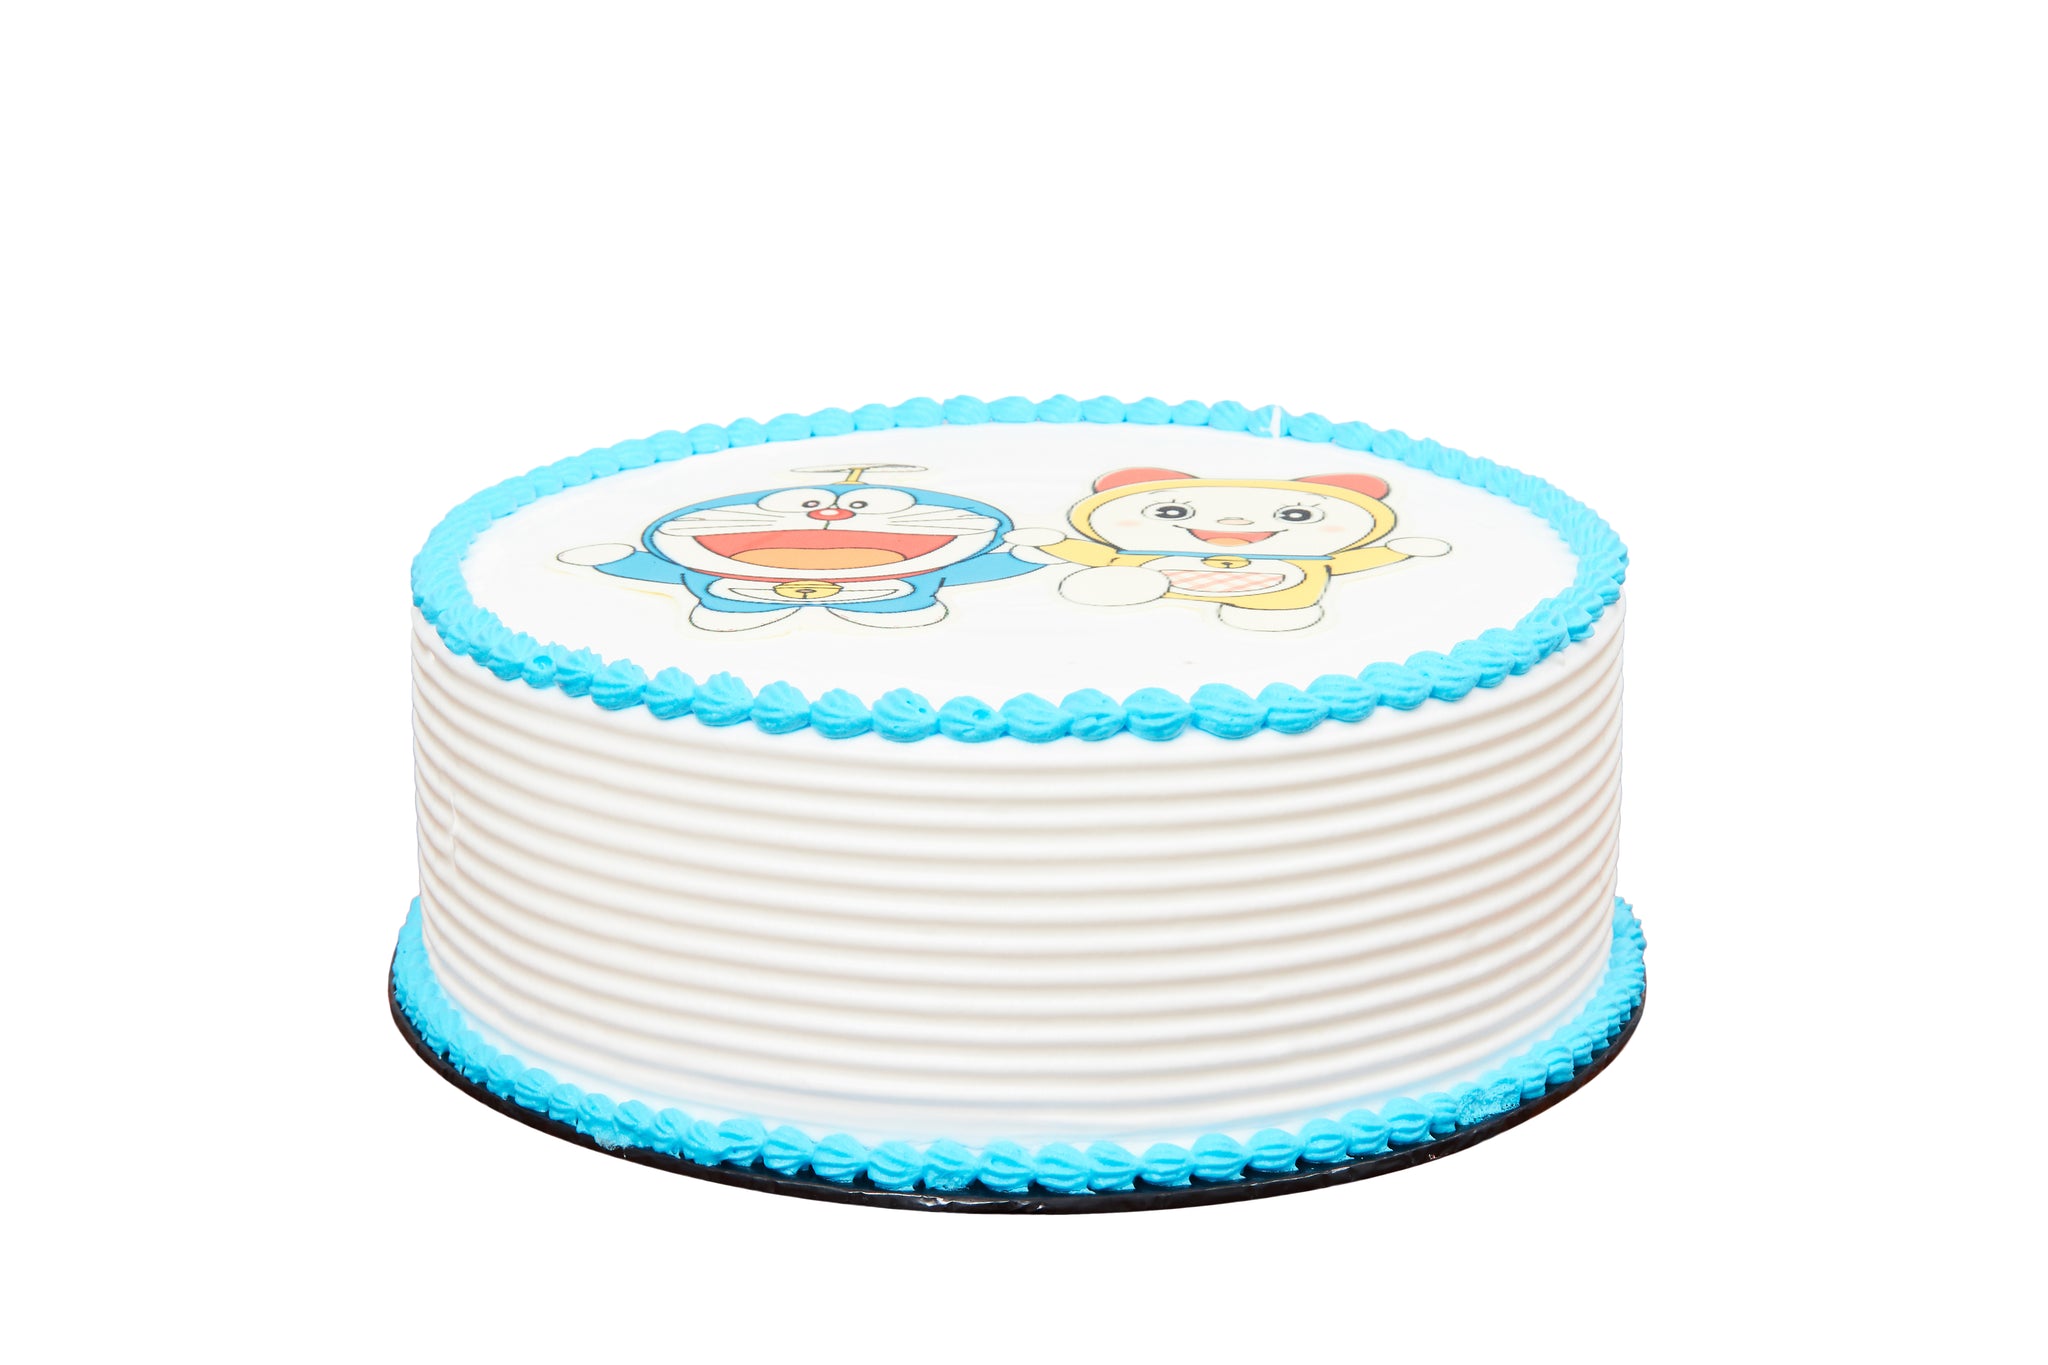 Special Print 9-inch Cake